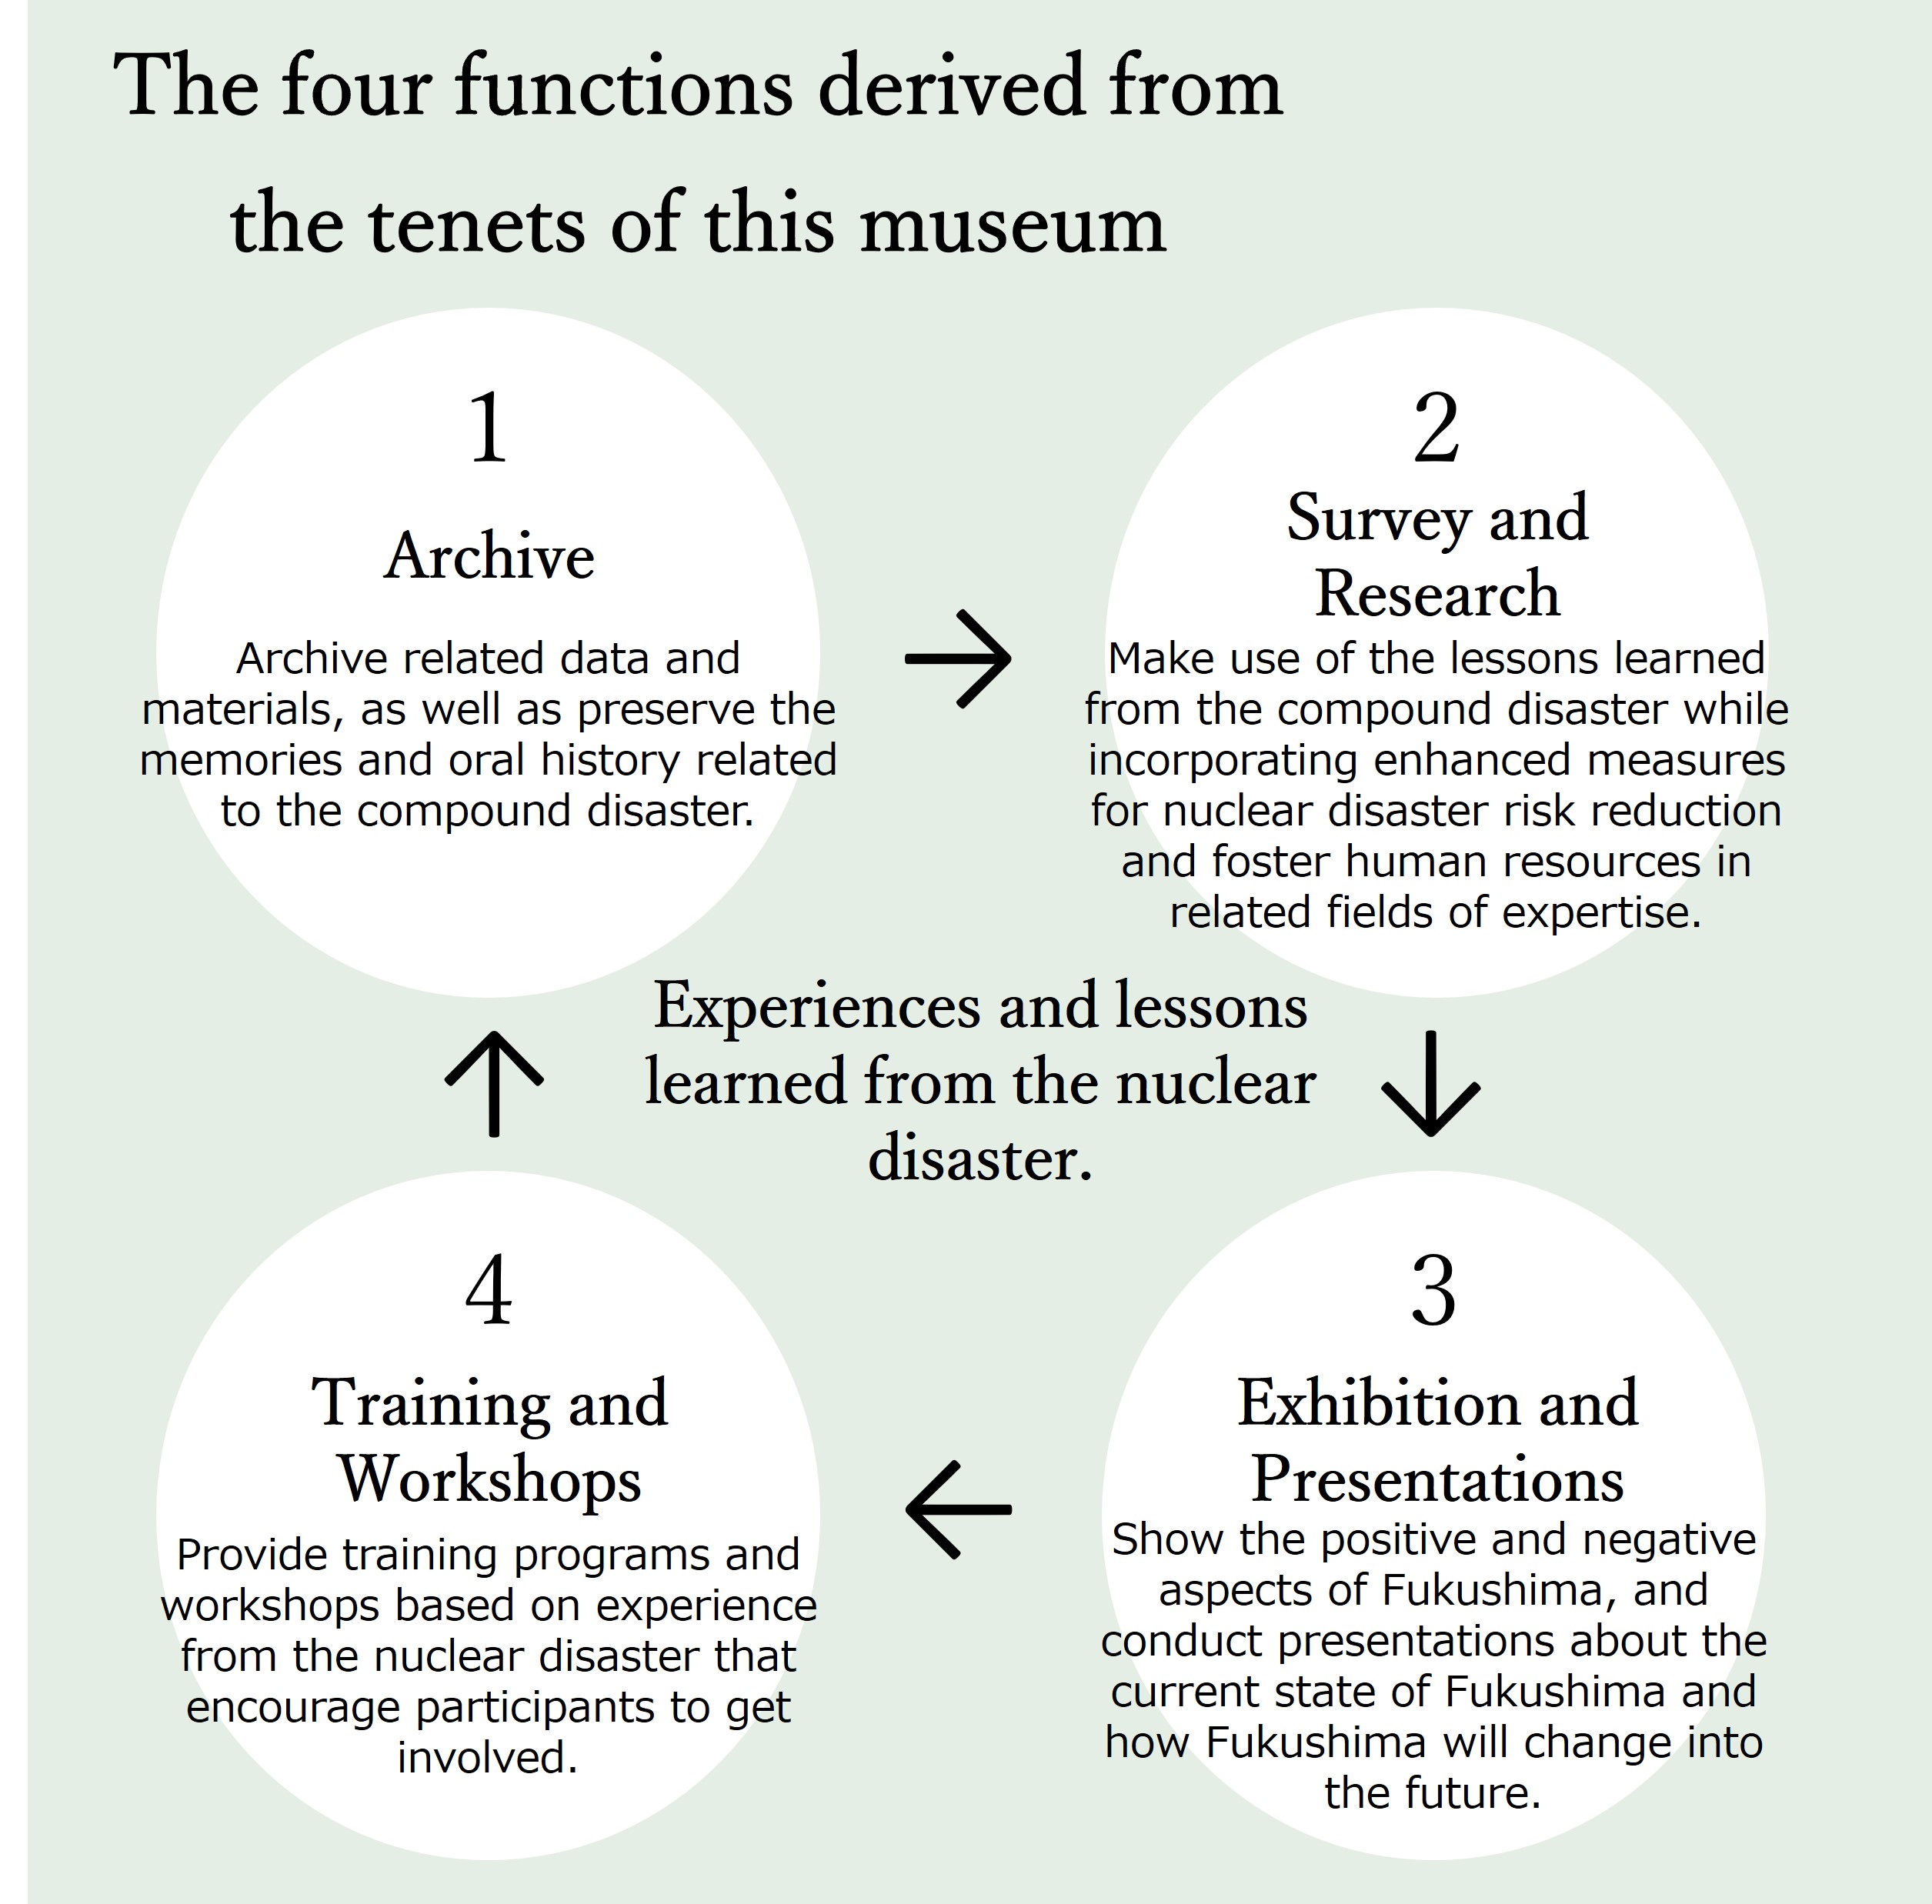 The four functions derived from the tenets of this museum.